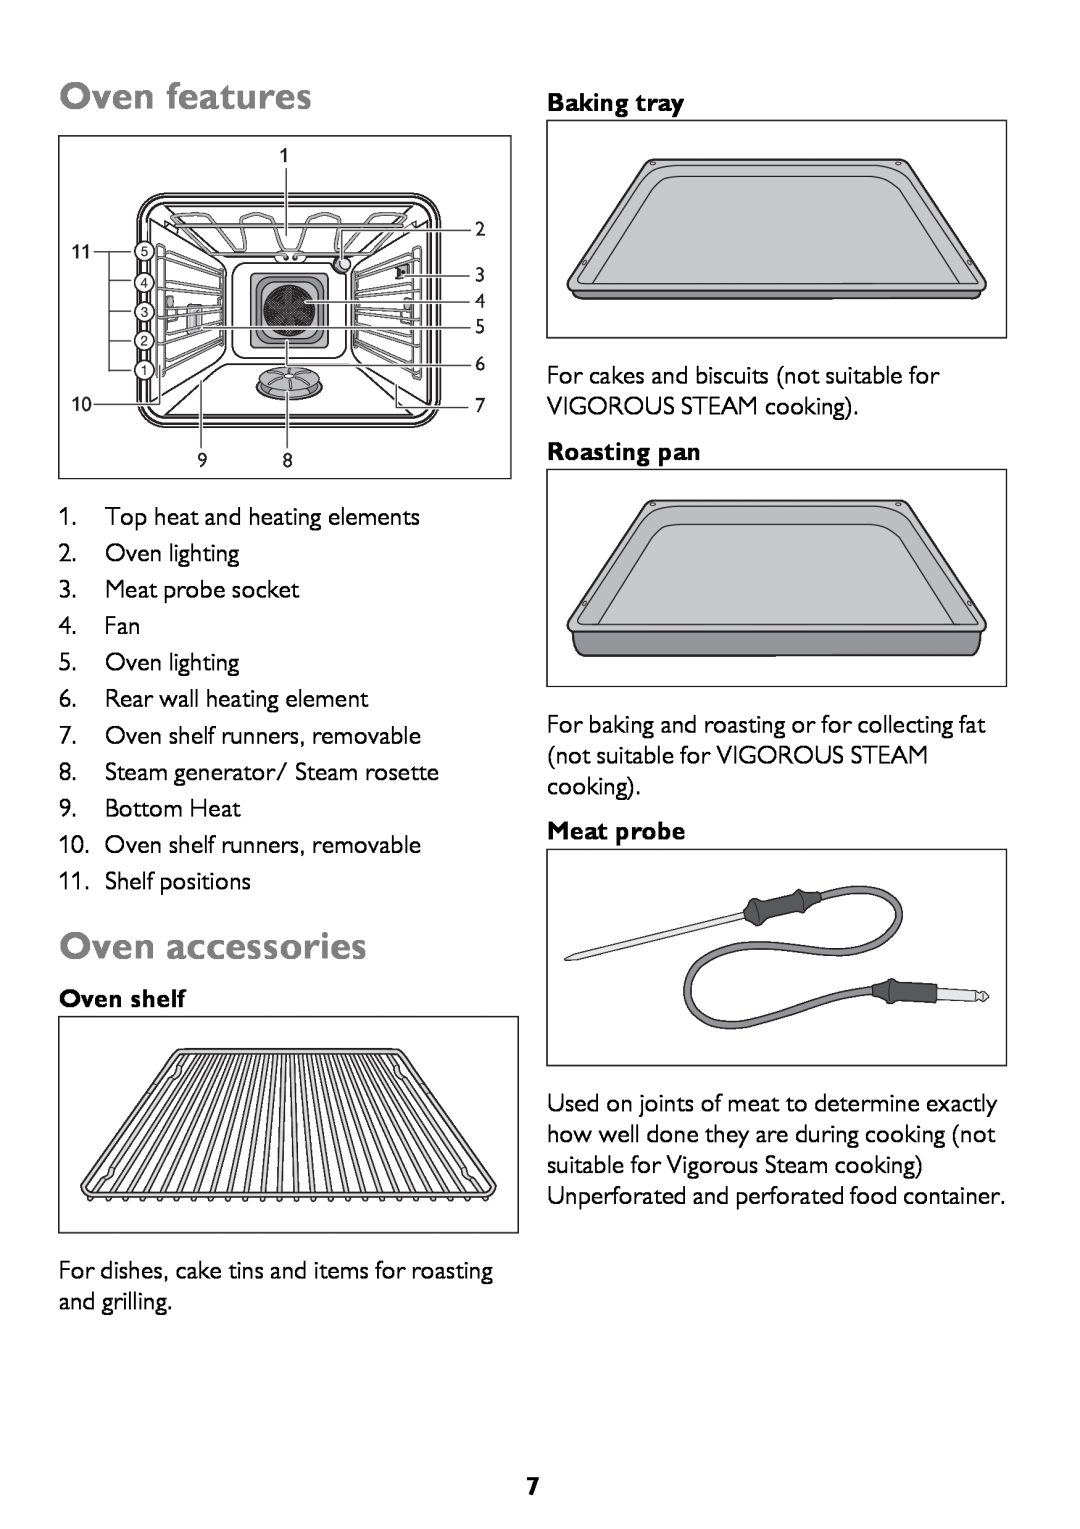 John Lewis JLBIOS610 instruction manual Oven features, Oven accessories, Oven shelf, Baking tray, Roasting pan, Meat probe 